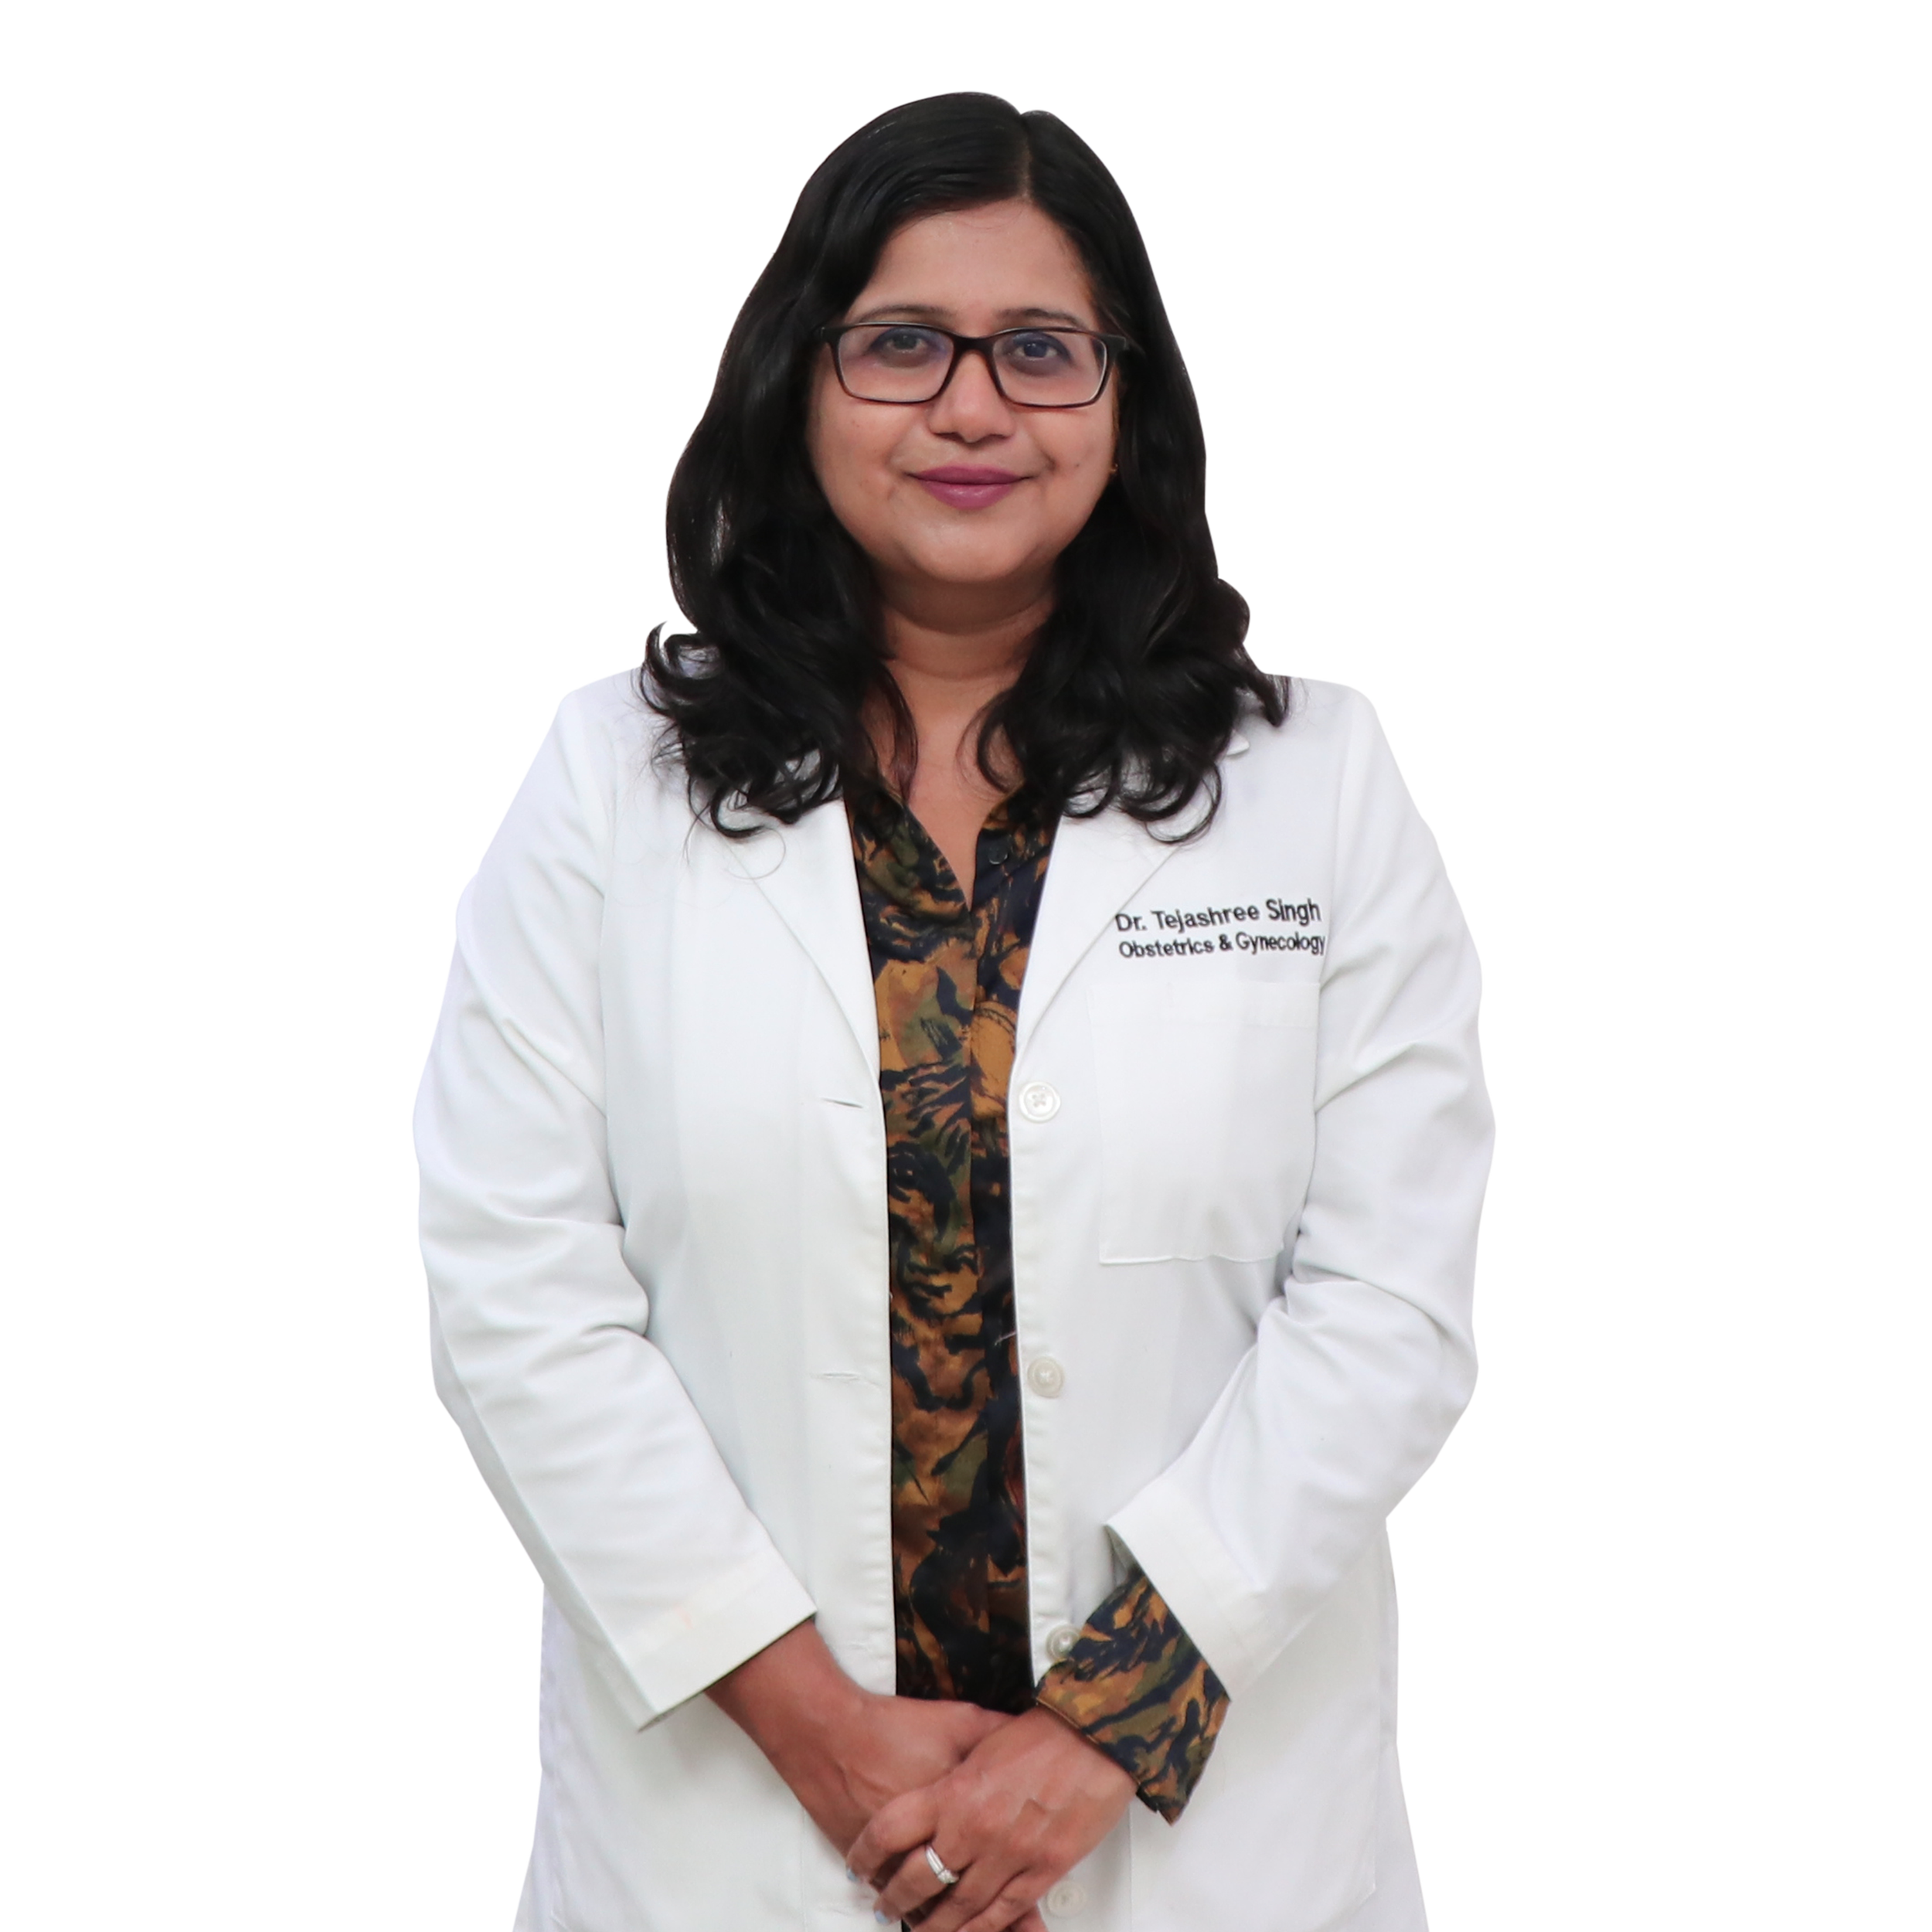 IVF - Dr. Tejashree Singh Specialist - Reproductive Endocrinology & Infertility